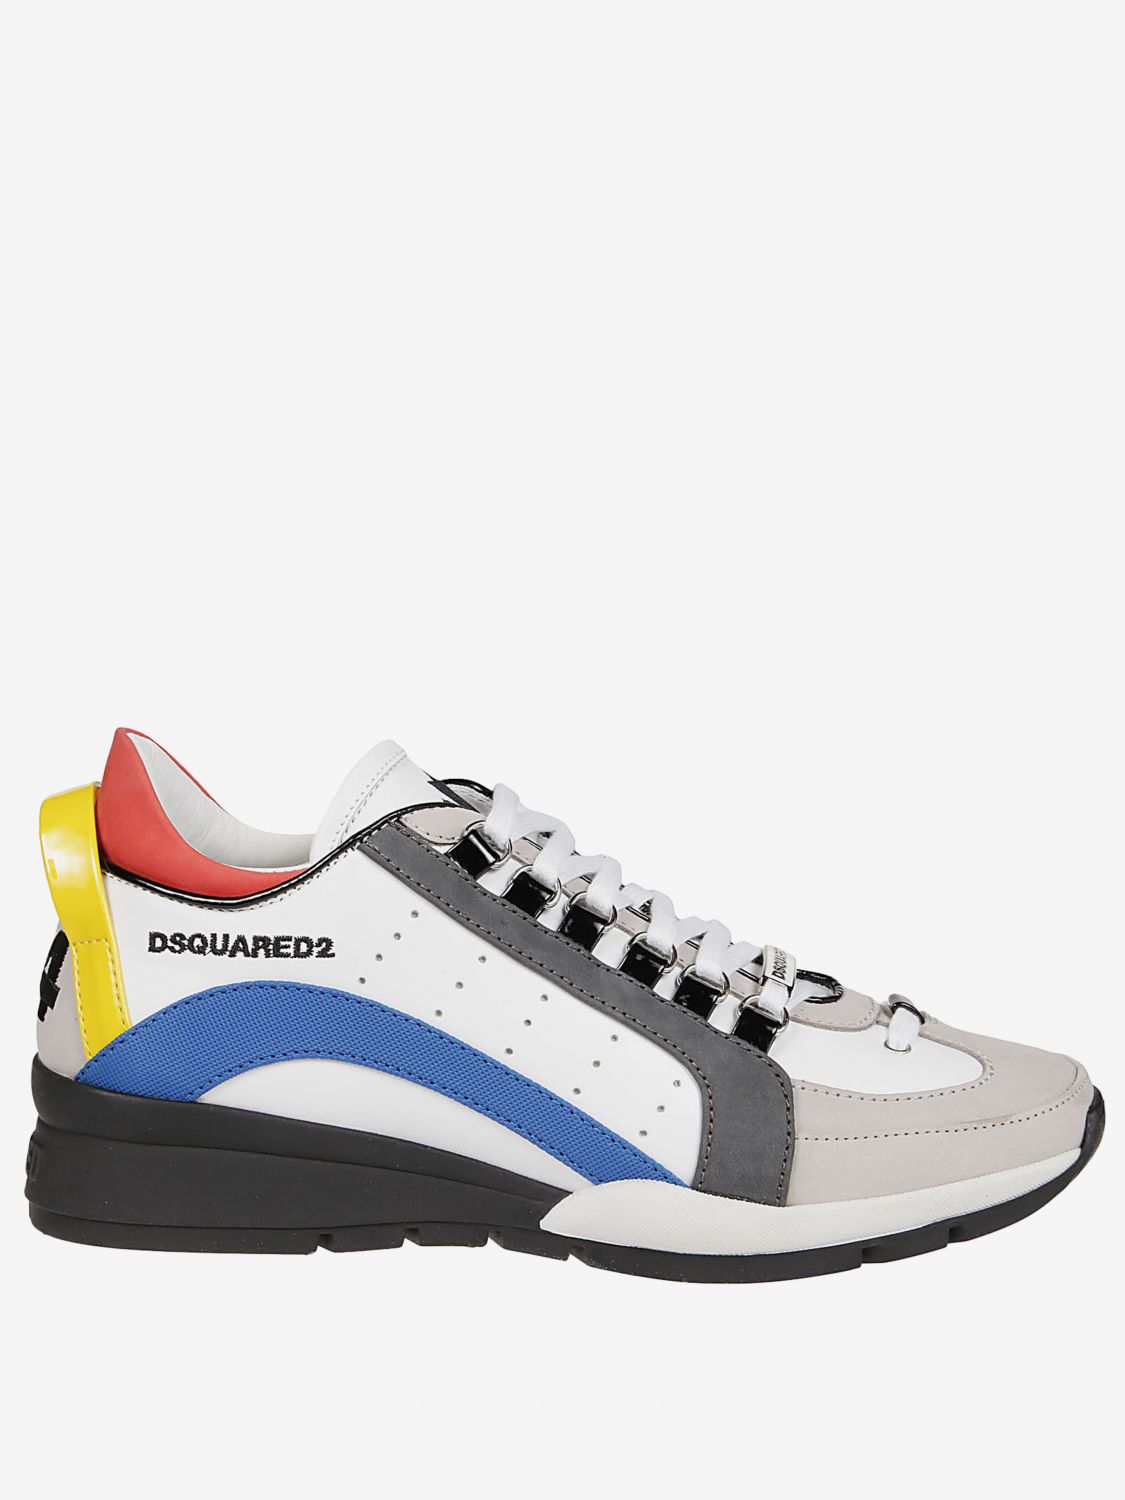 mens dsquared2 trainers uk